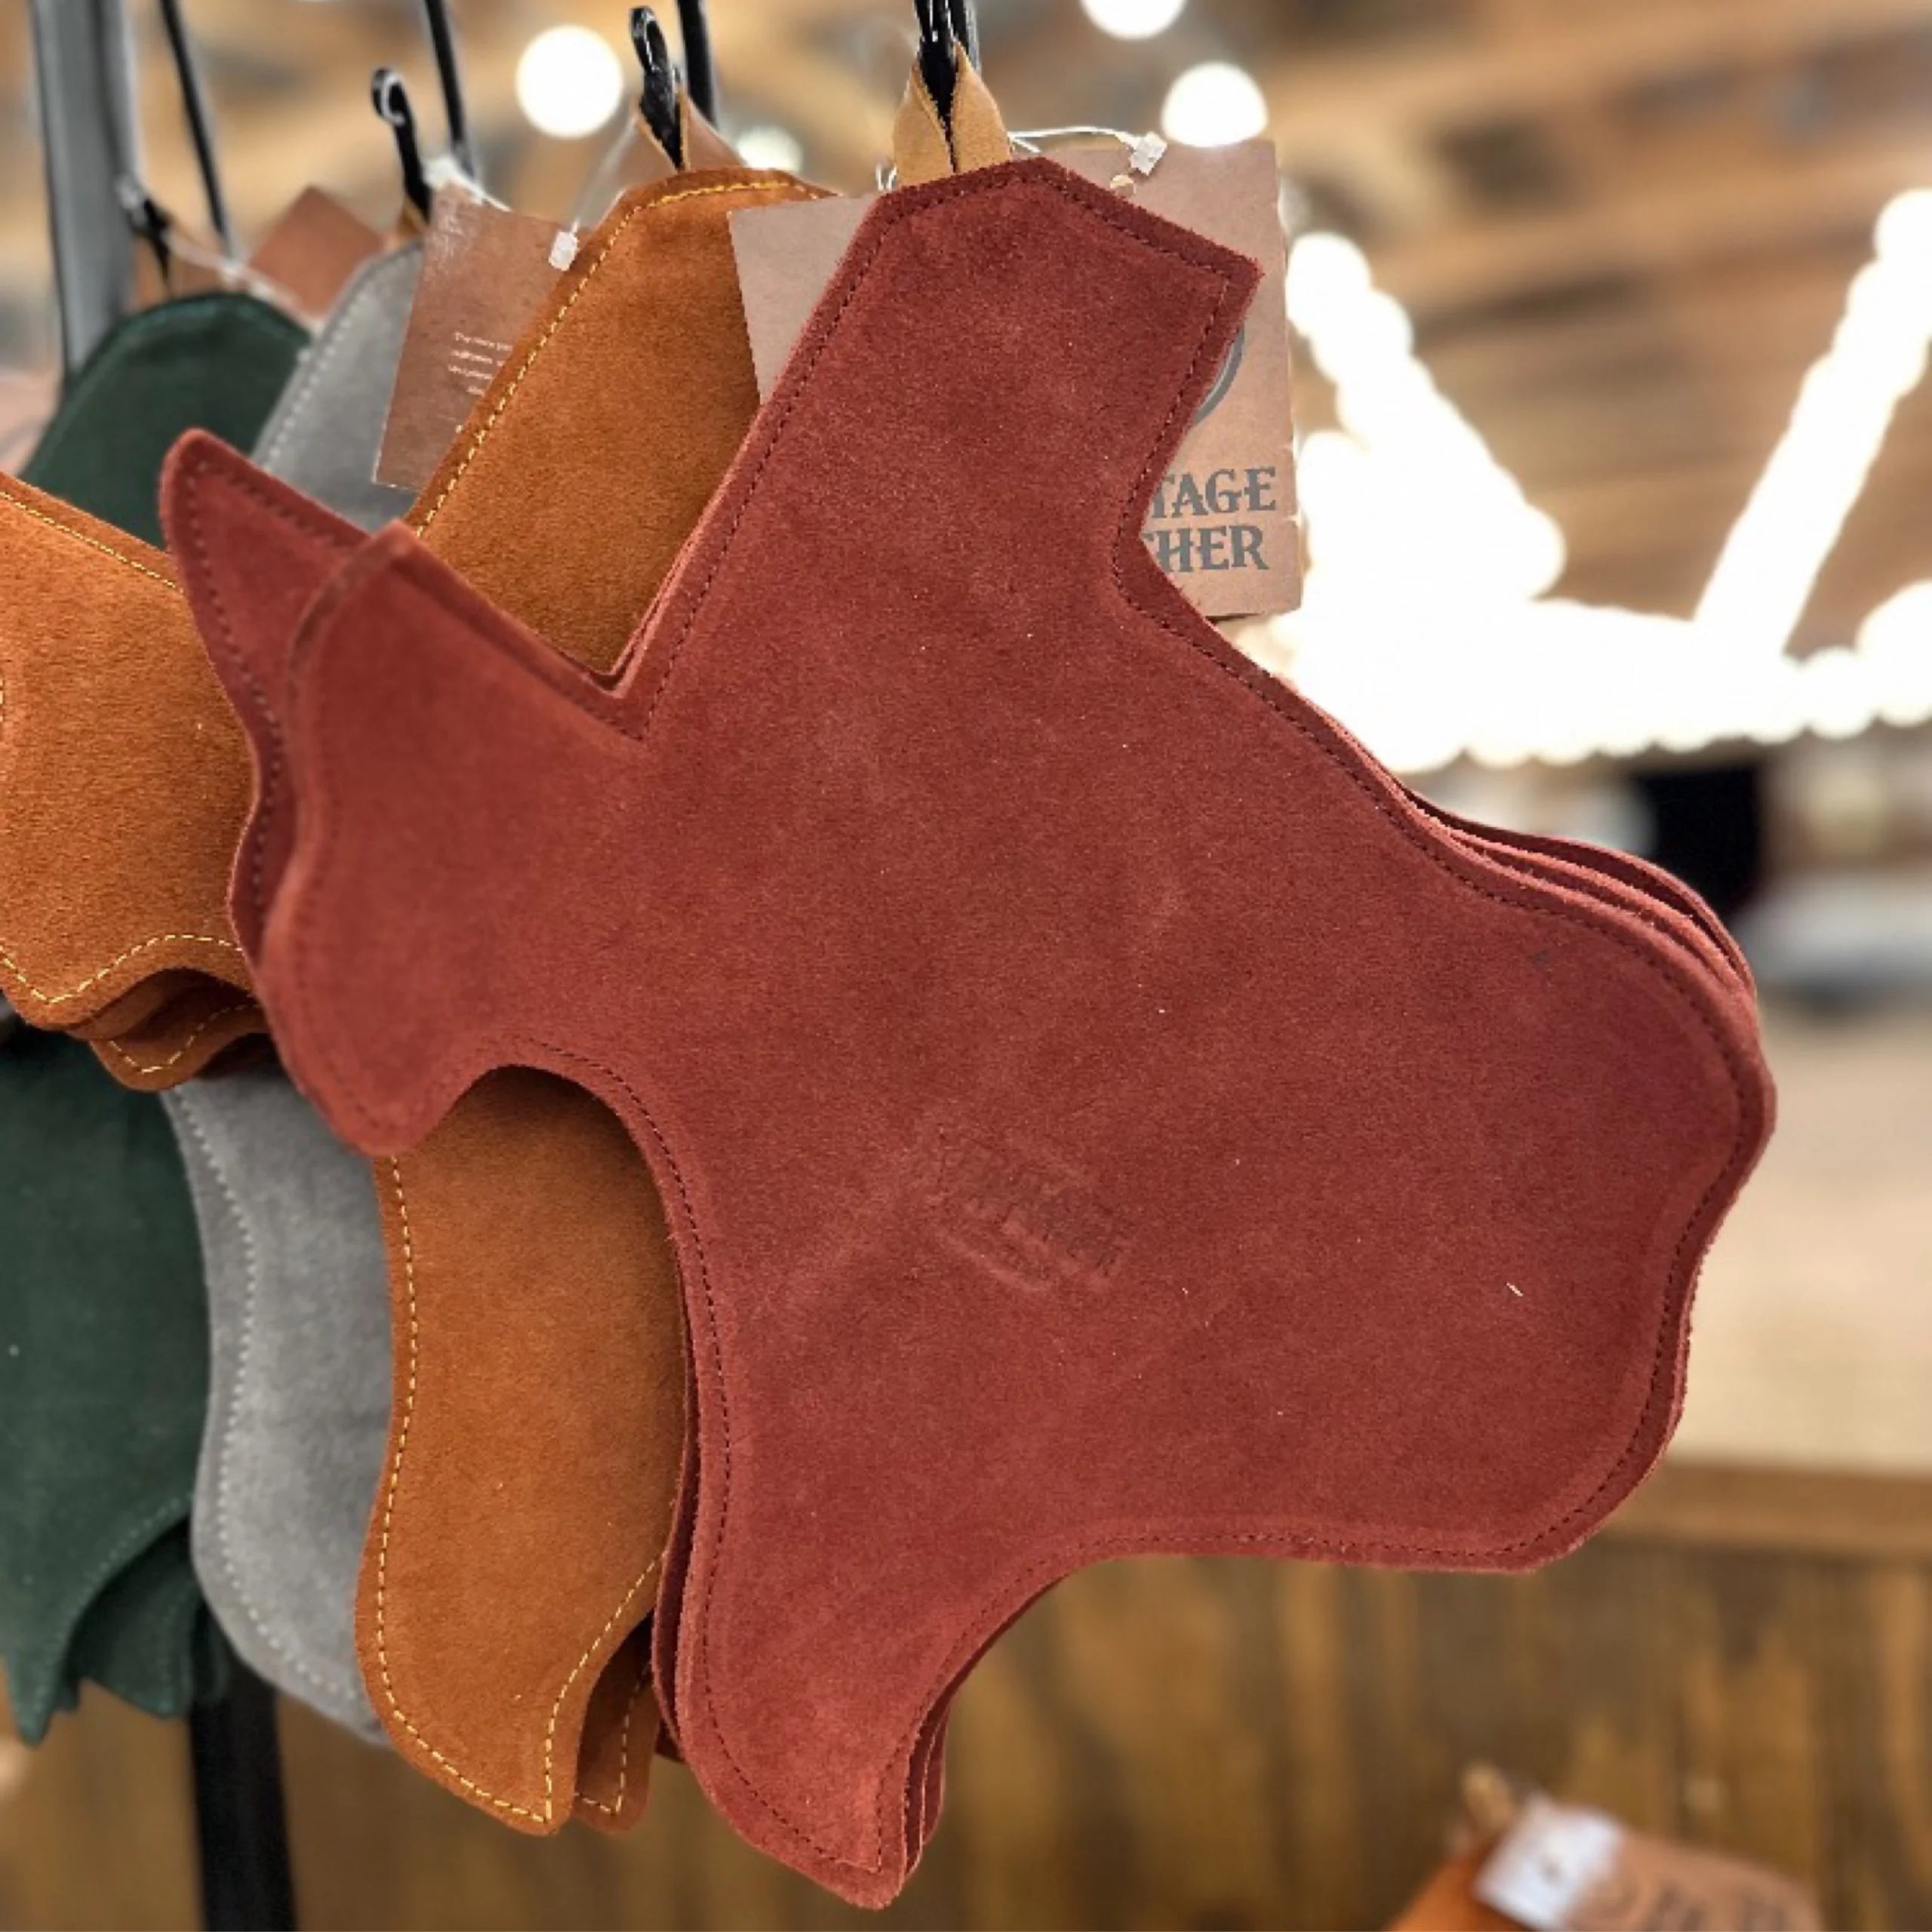 Heritage Leather - Texas Shaped Hot Pads